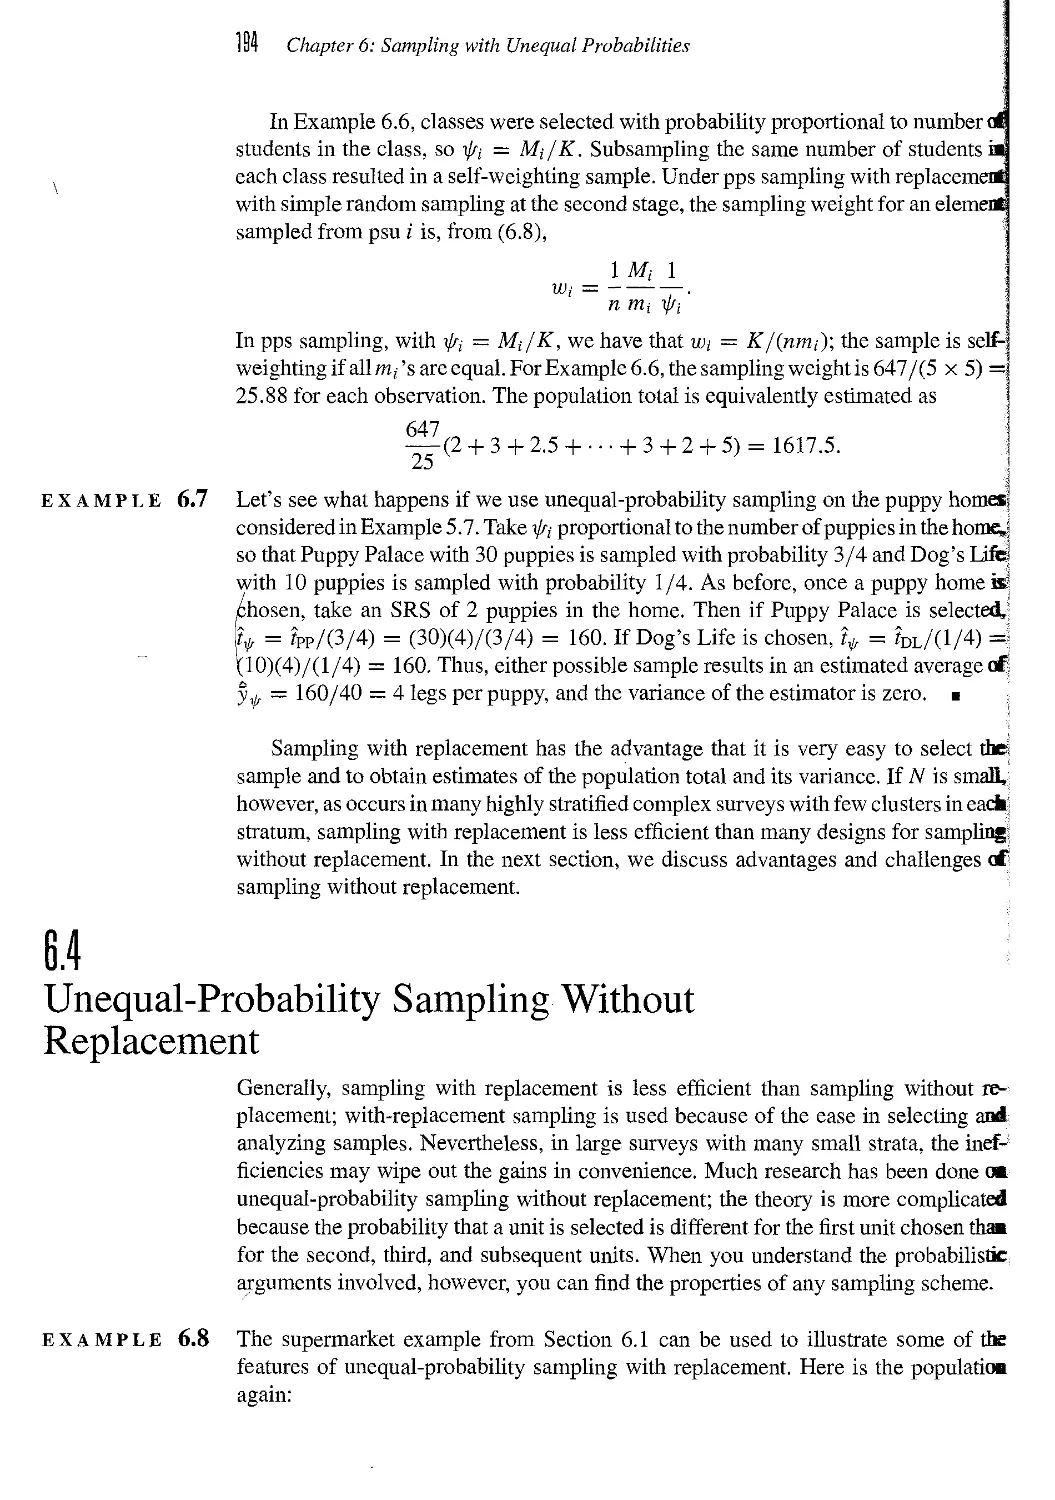 6.4 Unequal-Probability Sampling Without Replacement